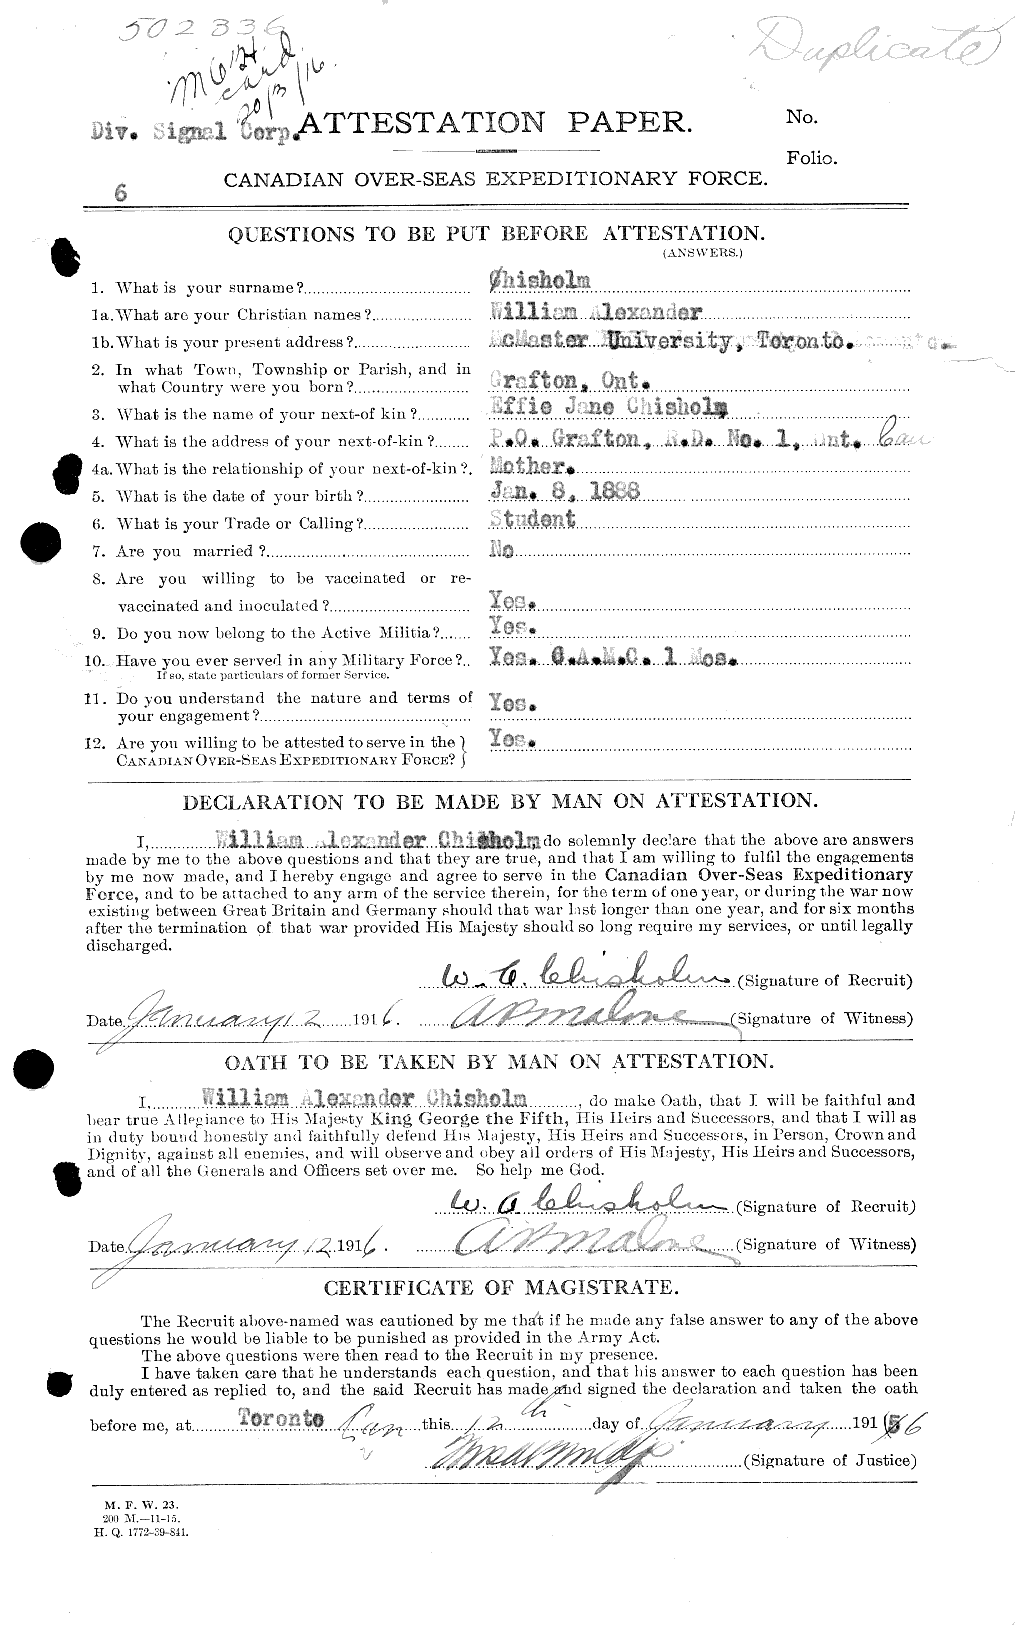 Personnel Records of the First World War - CEF 020359a